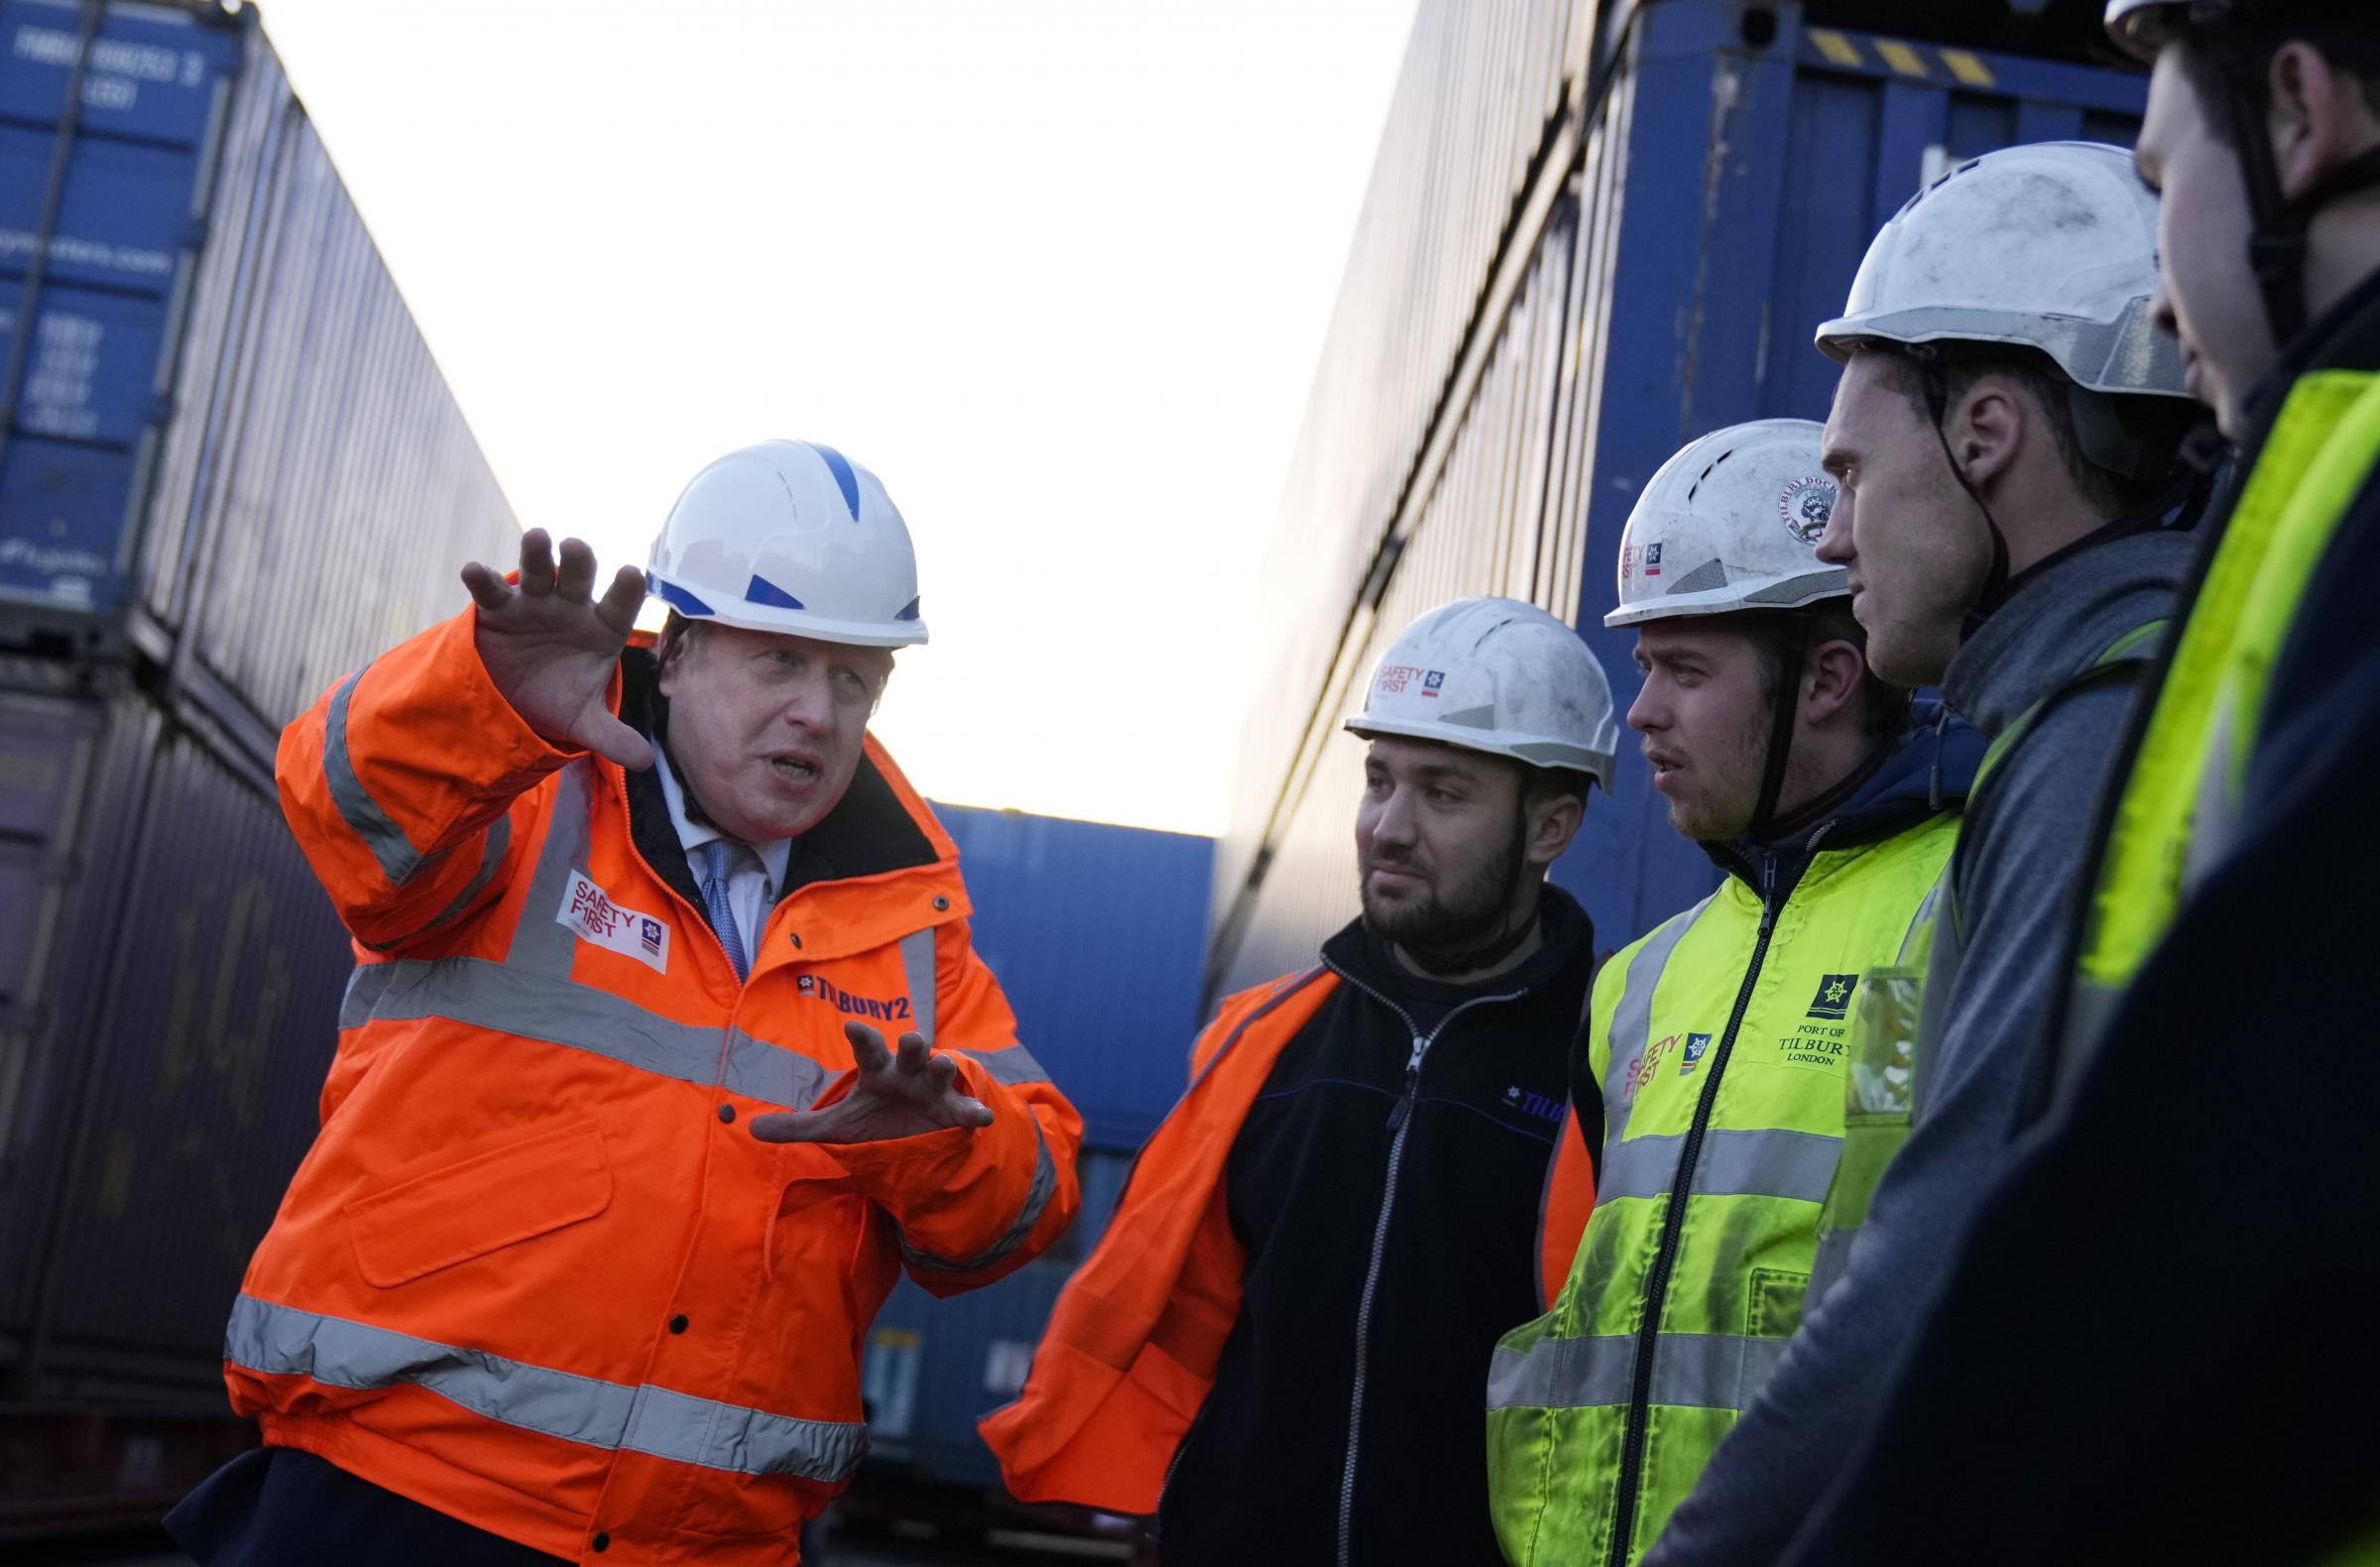 Prime Minister Boris Johnson speaks with workers during a visit to the Tilbury Docks in Essex. Picture date: Monday January 31, 2022.